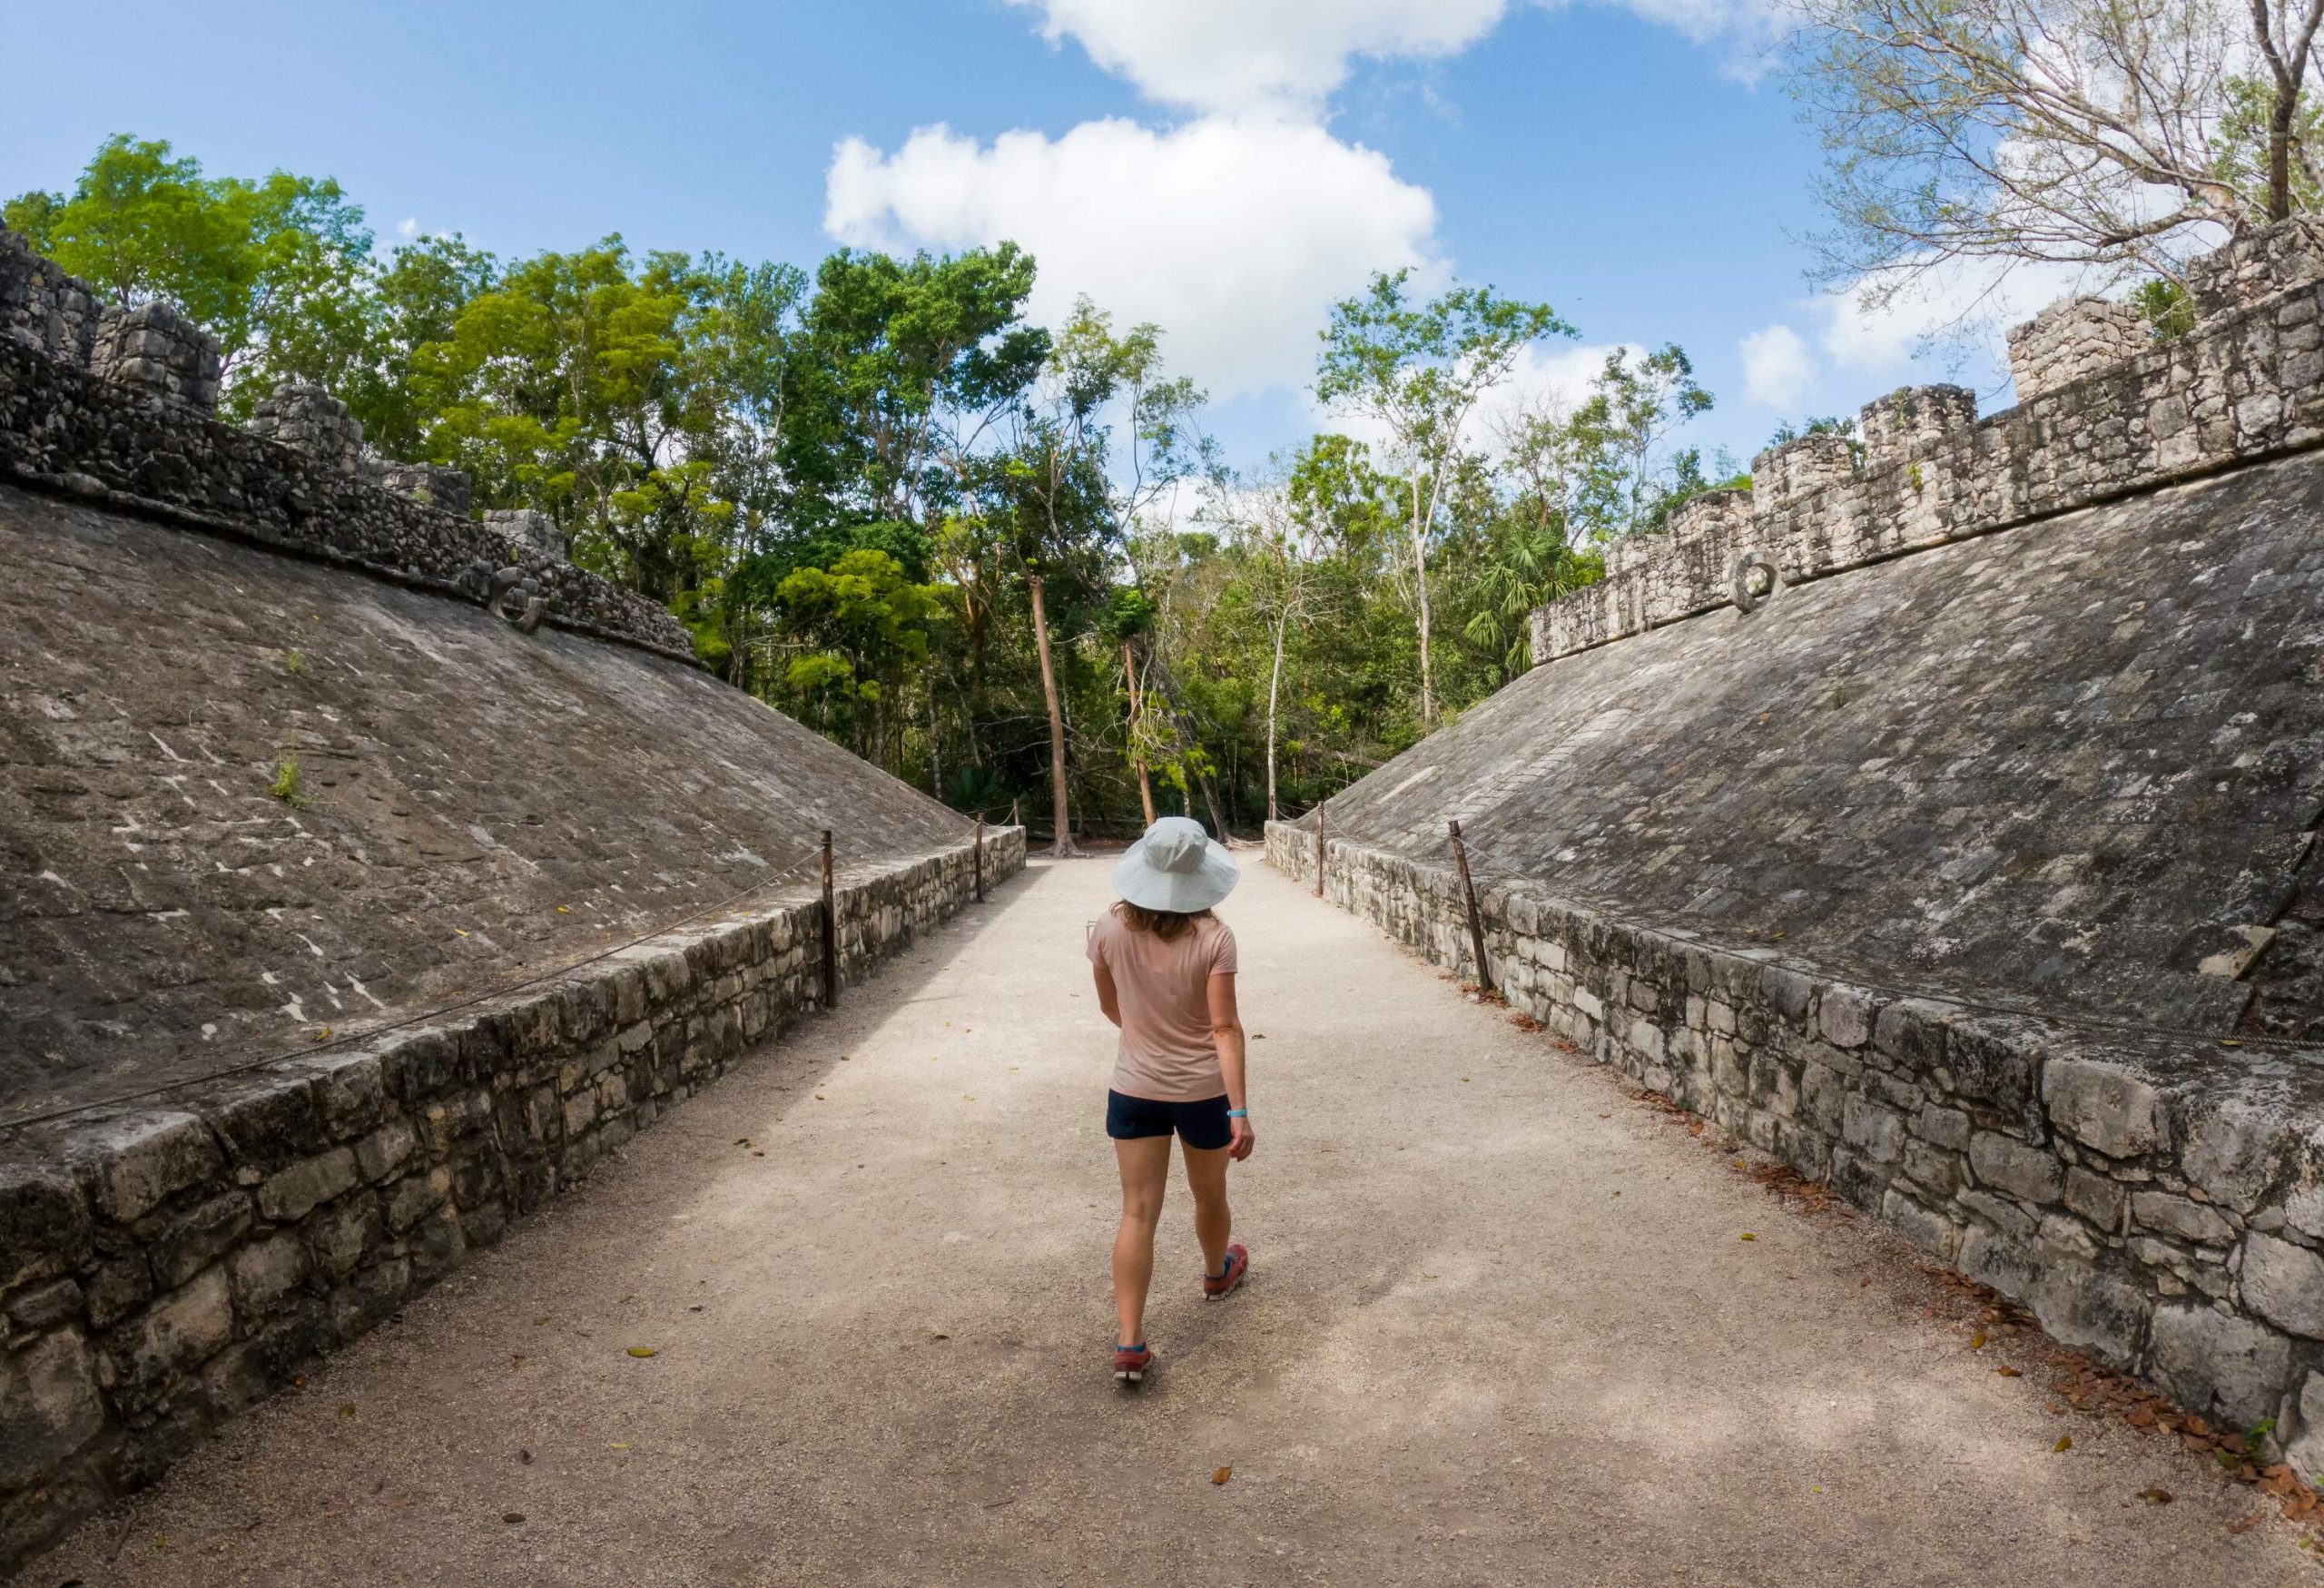 Back view of a young girl walking between the rock ruins surrounded by trees in a Mayan archaeological area.